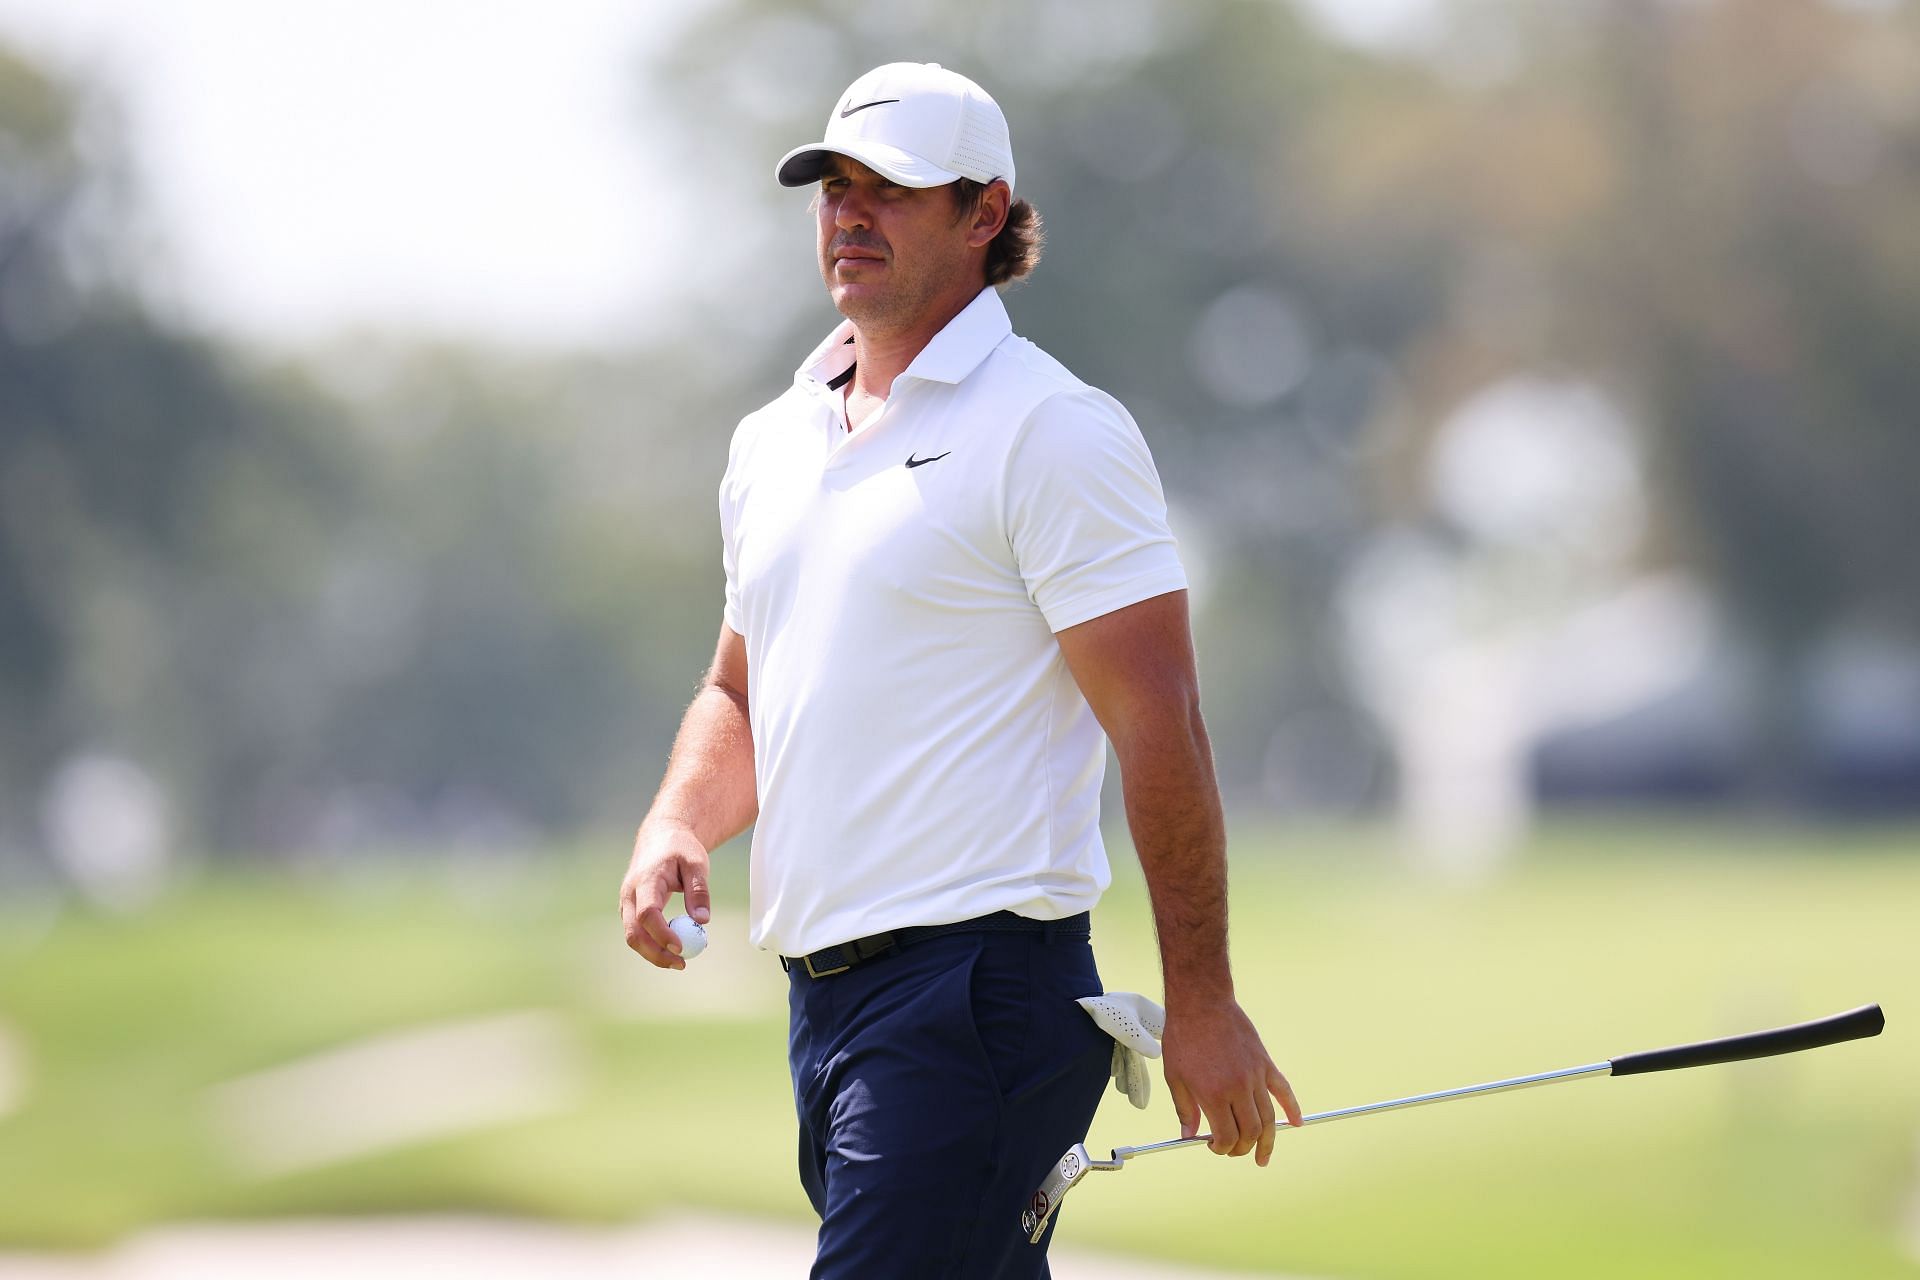 Brooks Koepka was named to the Ryder Cup